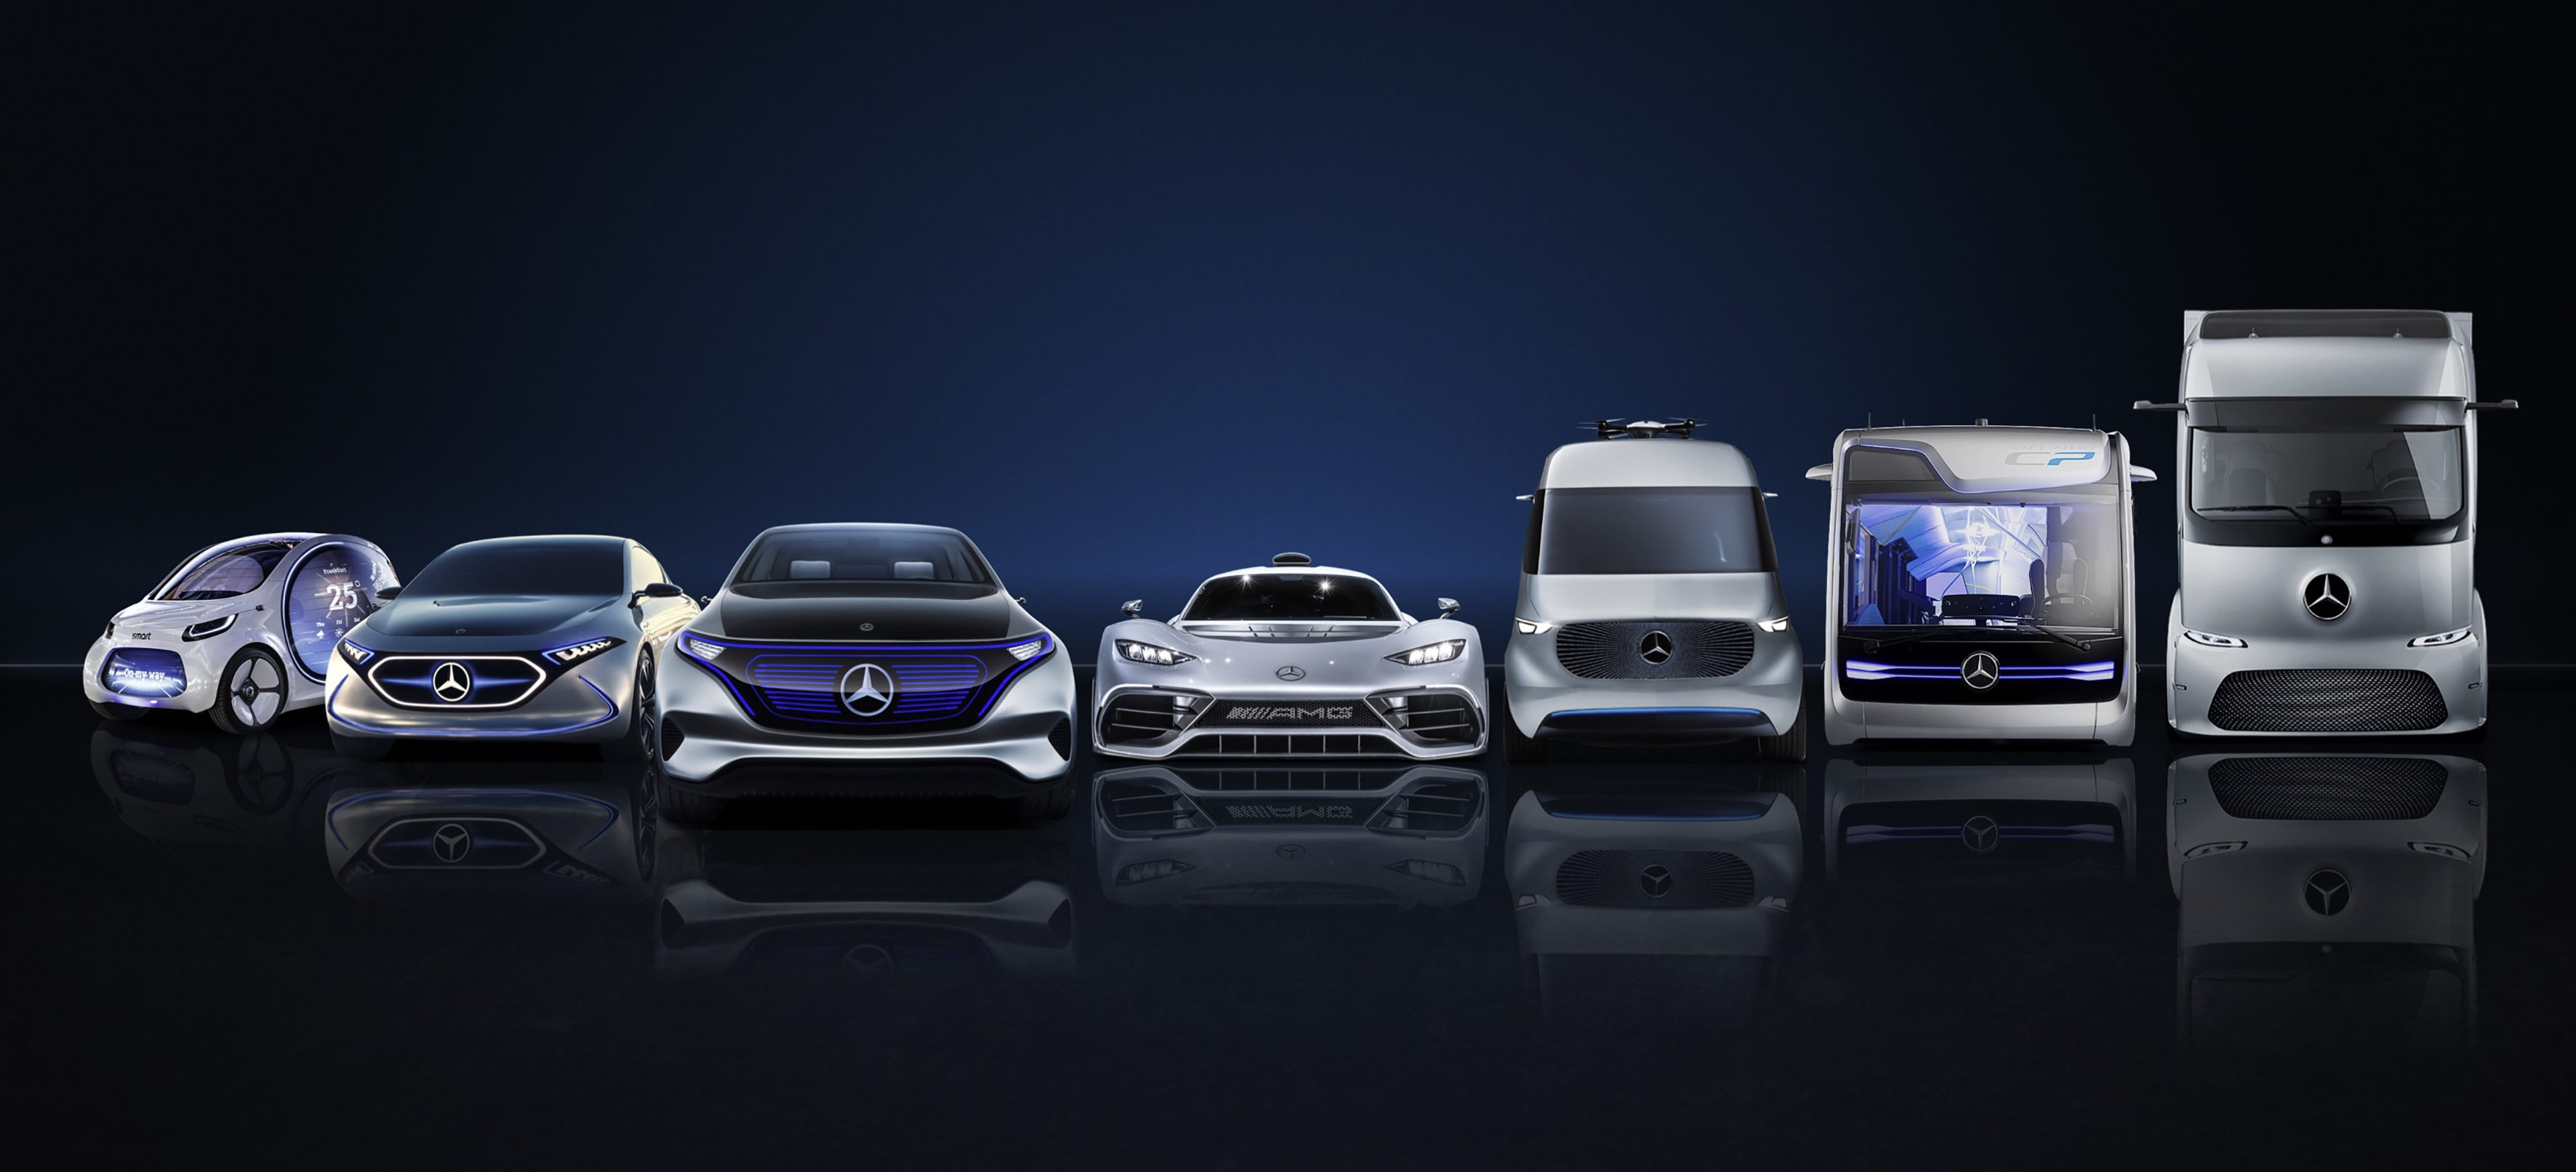 Daimler is buying over 20 billion in battery cells to support electric